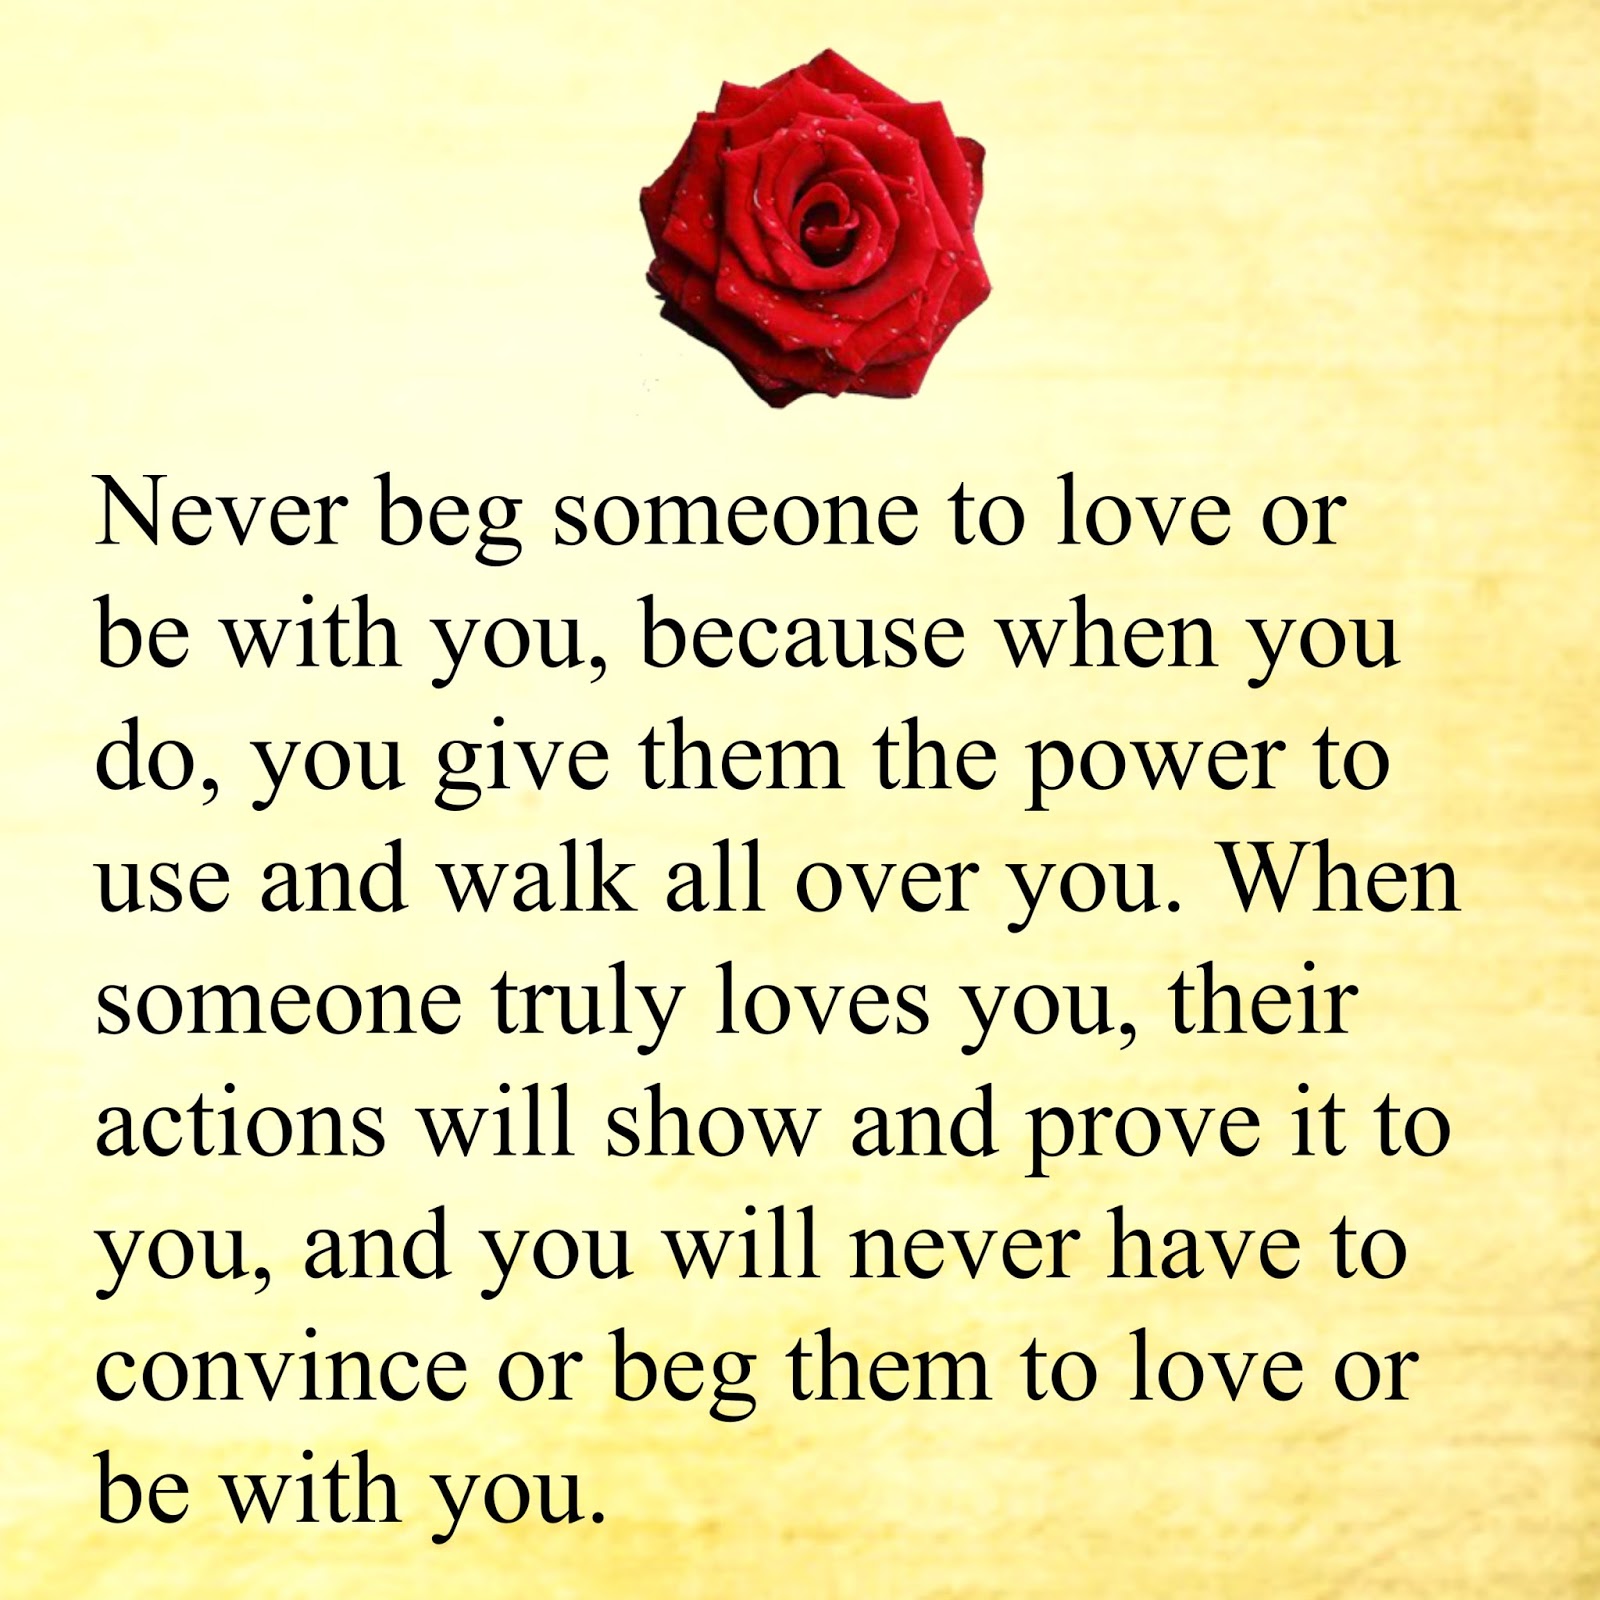 Never beg someone to love or be with you because when you do you give them the power to use and walk all over you When someone truly loves you